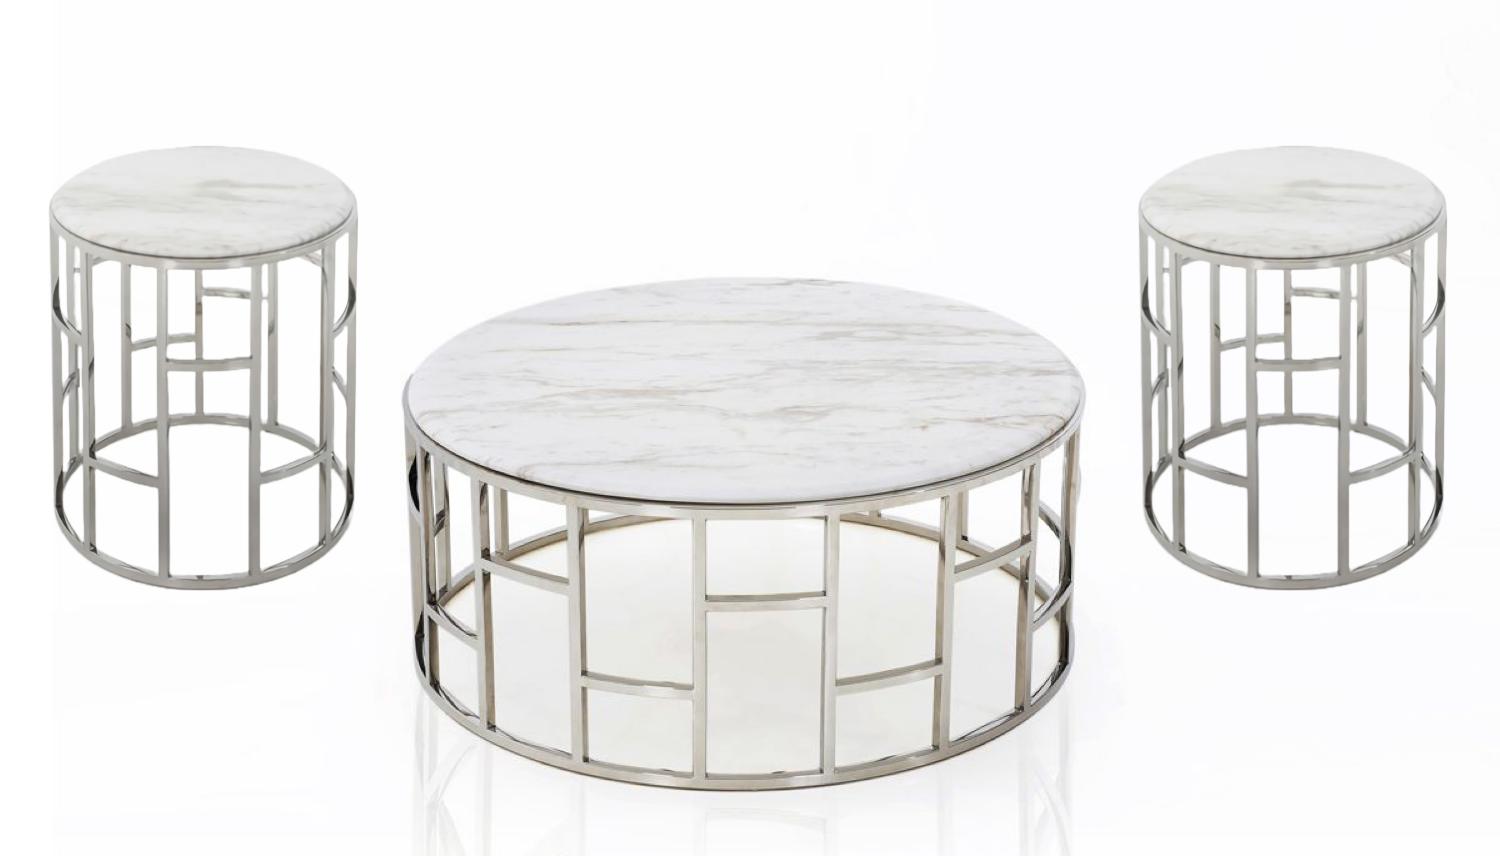 Modern Coffee Table and 2 End Tables Silvan VGHB228E-EBN-3pcs in White, Silver 